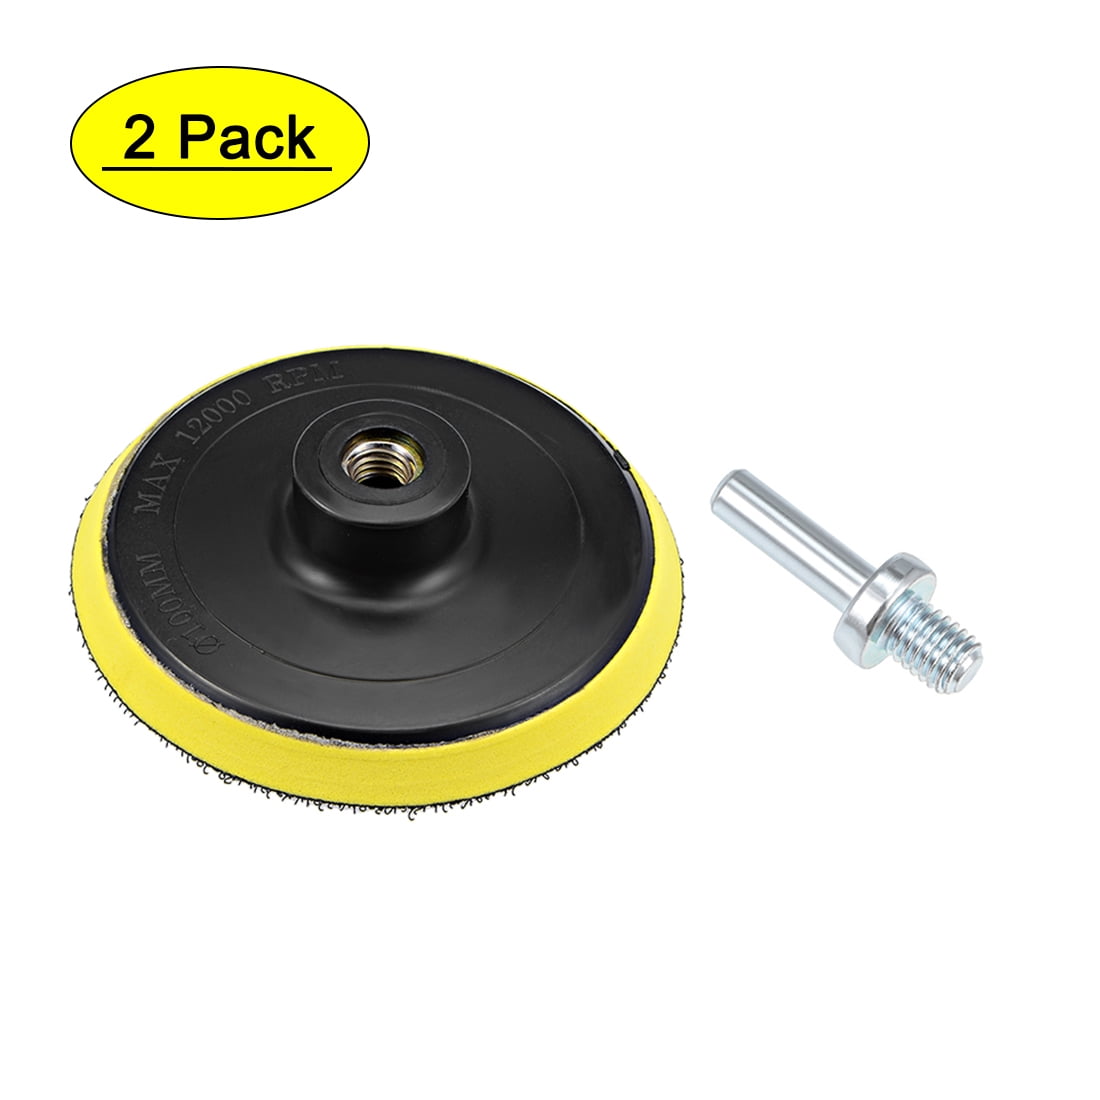 GP12736 Heavy-Duty Hook & Loop Spindle Backing Pad with drill attachment Ø 125mm 